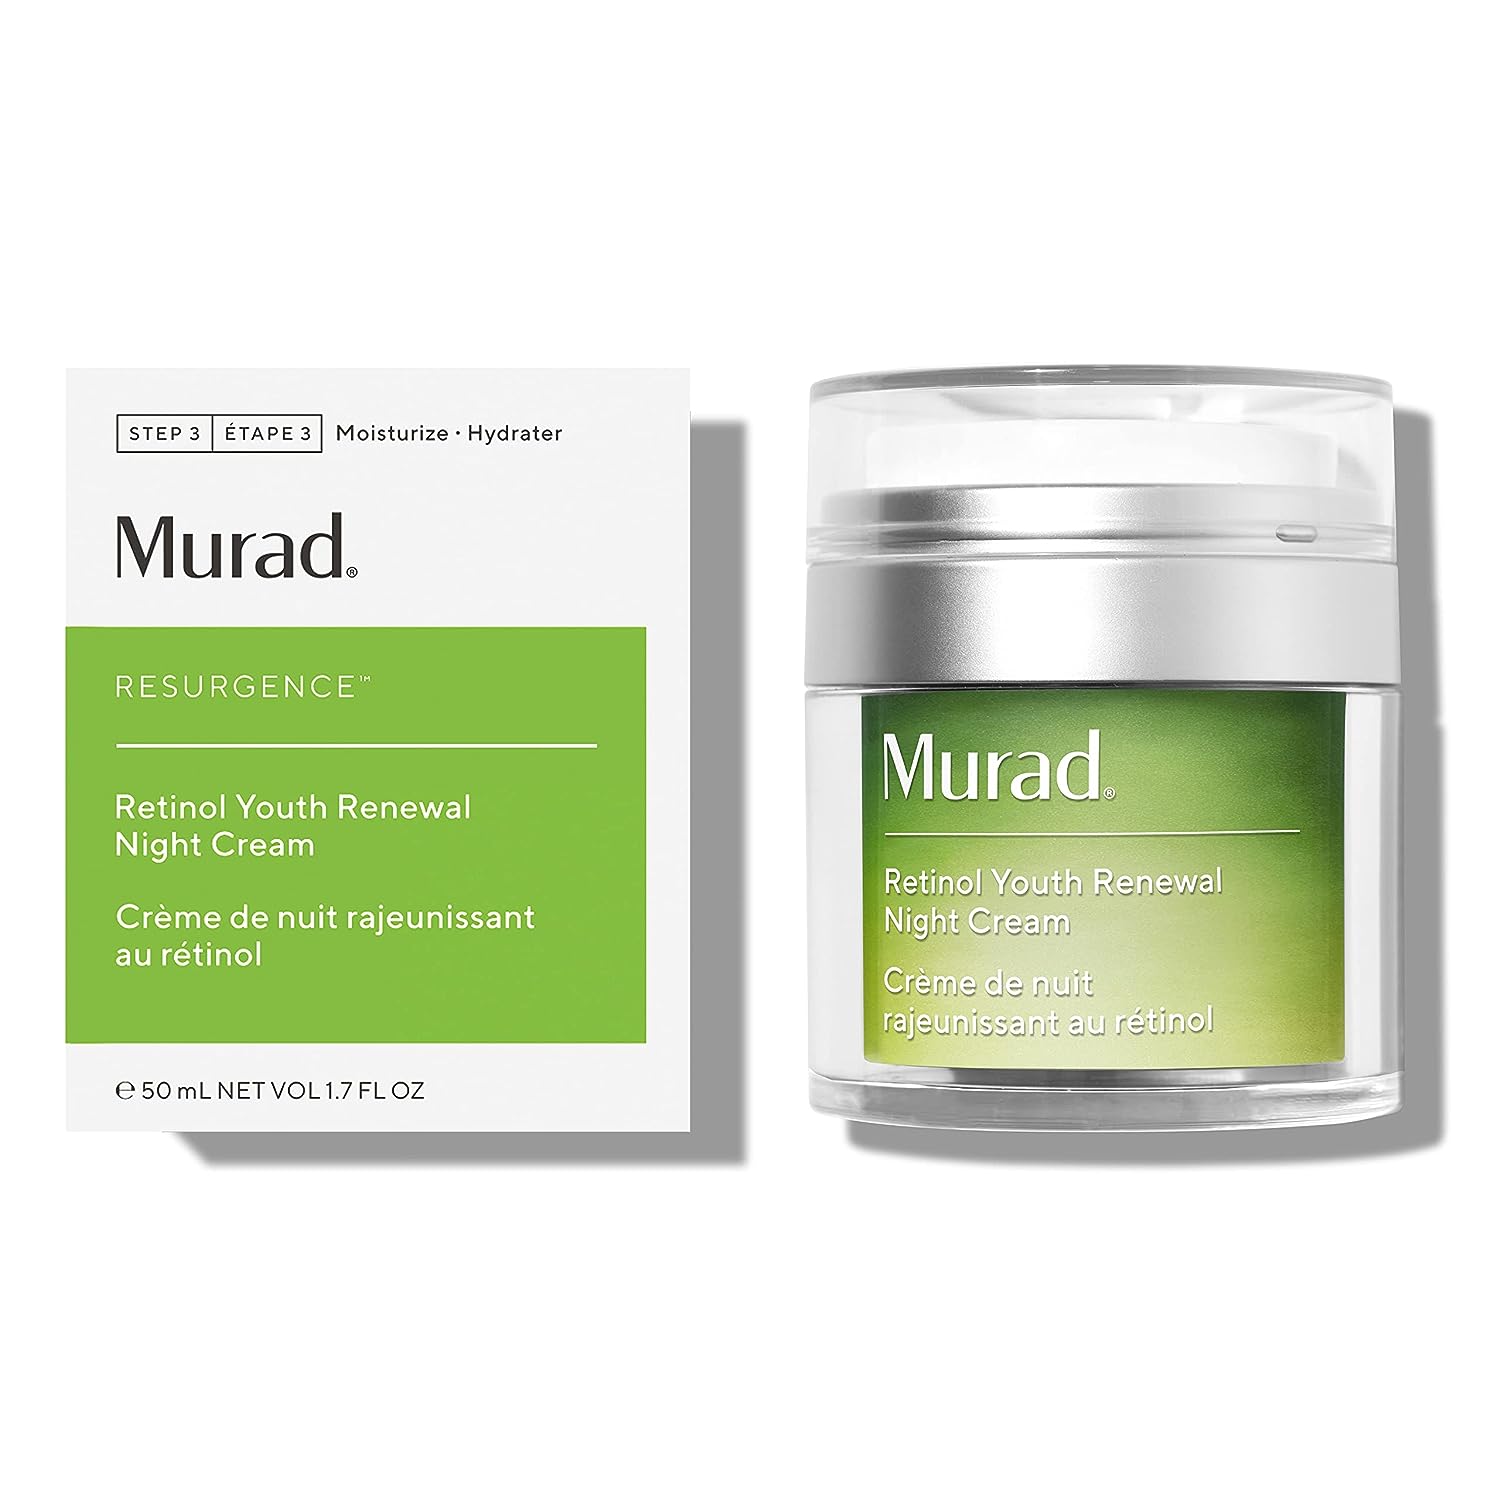 Murad Resurgence Retinol Youth Renewal Night Cream – Anti-Aging Face Cream for Lines and Wrinkles – Hydrating, Firming and Smoothing Skin Care Treatment, 1.7